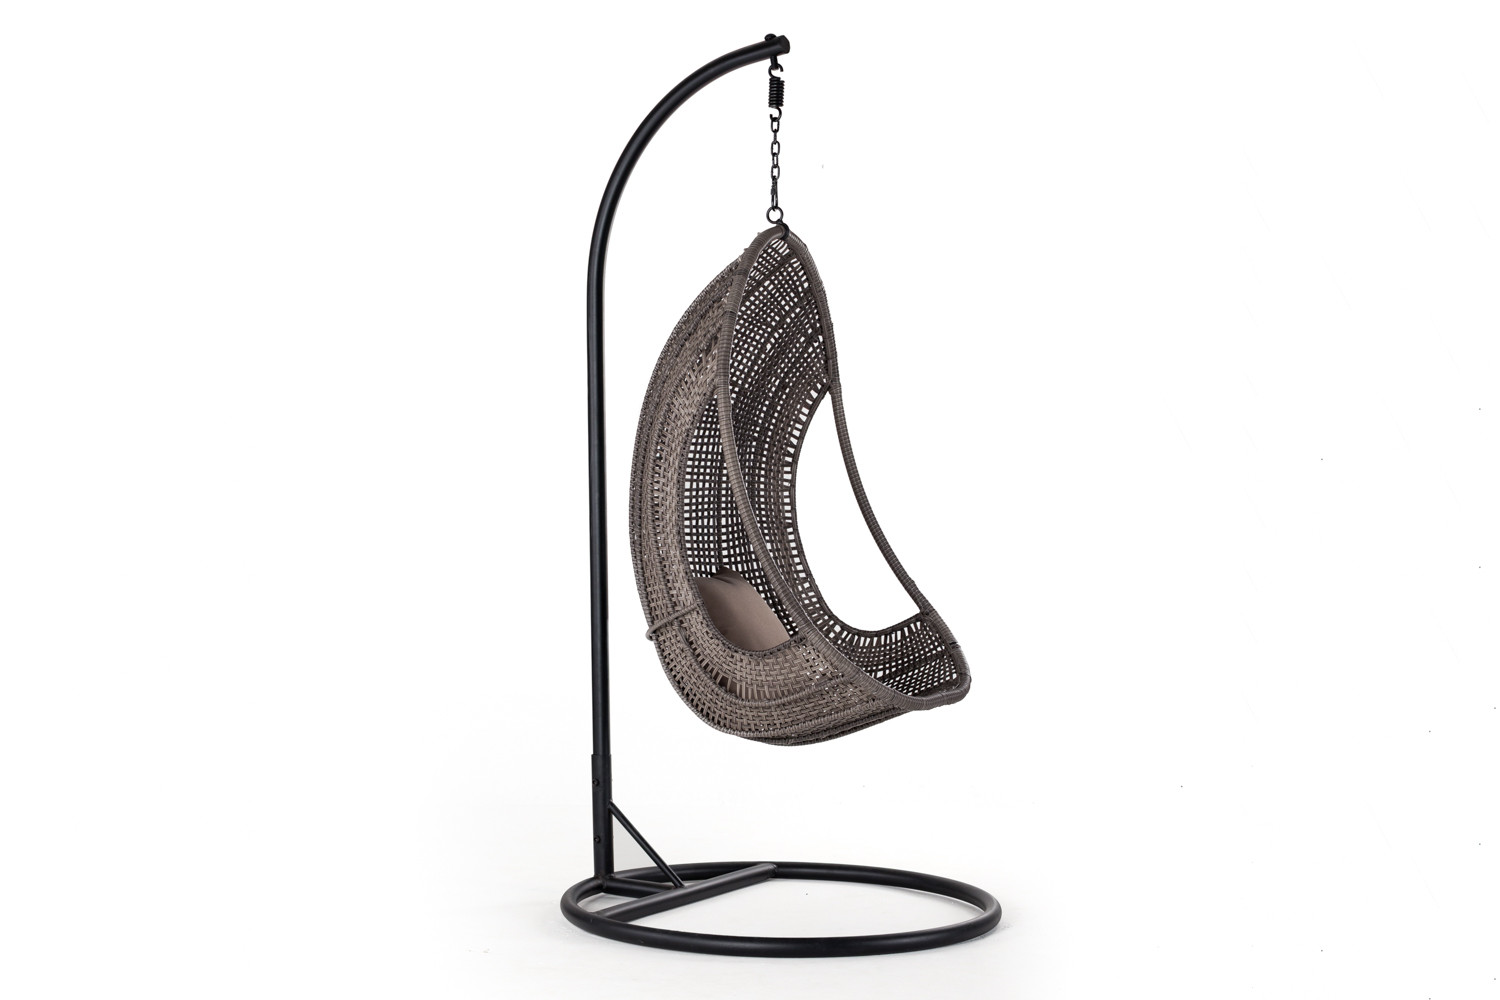 Atilla Hanging Chair - Stone Hanging Chairs - 2